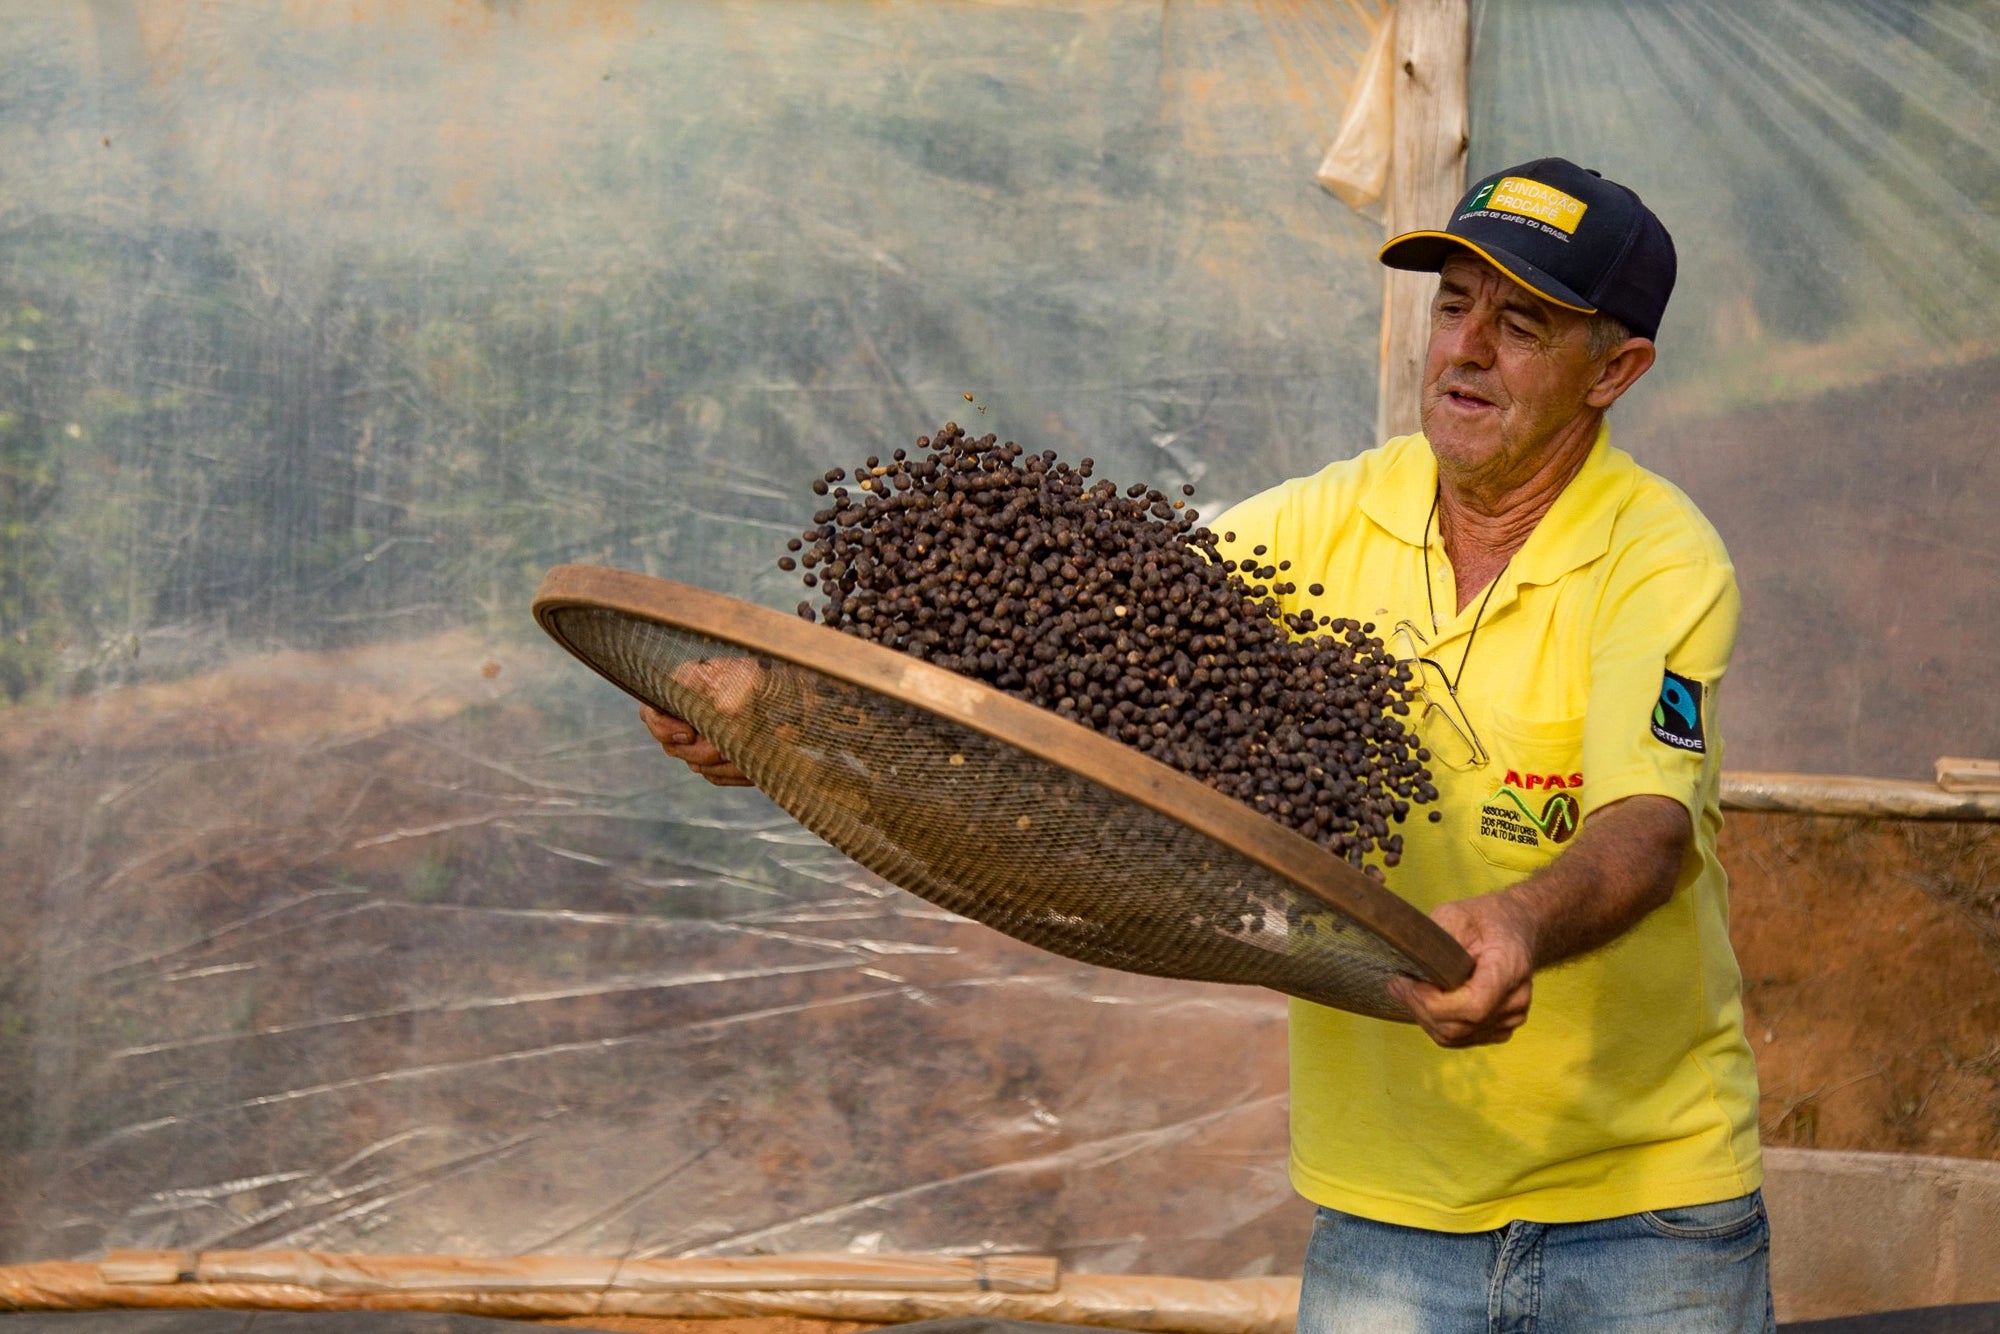 Brazilian coffee farmer in yellow shirt tosses dried coffee cherries in the air on a utensil that looks like a large flat rounded sifter